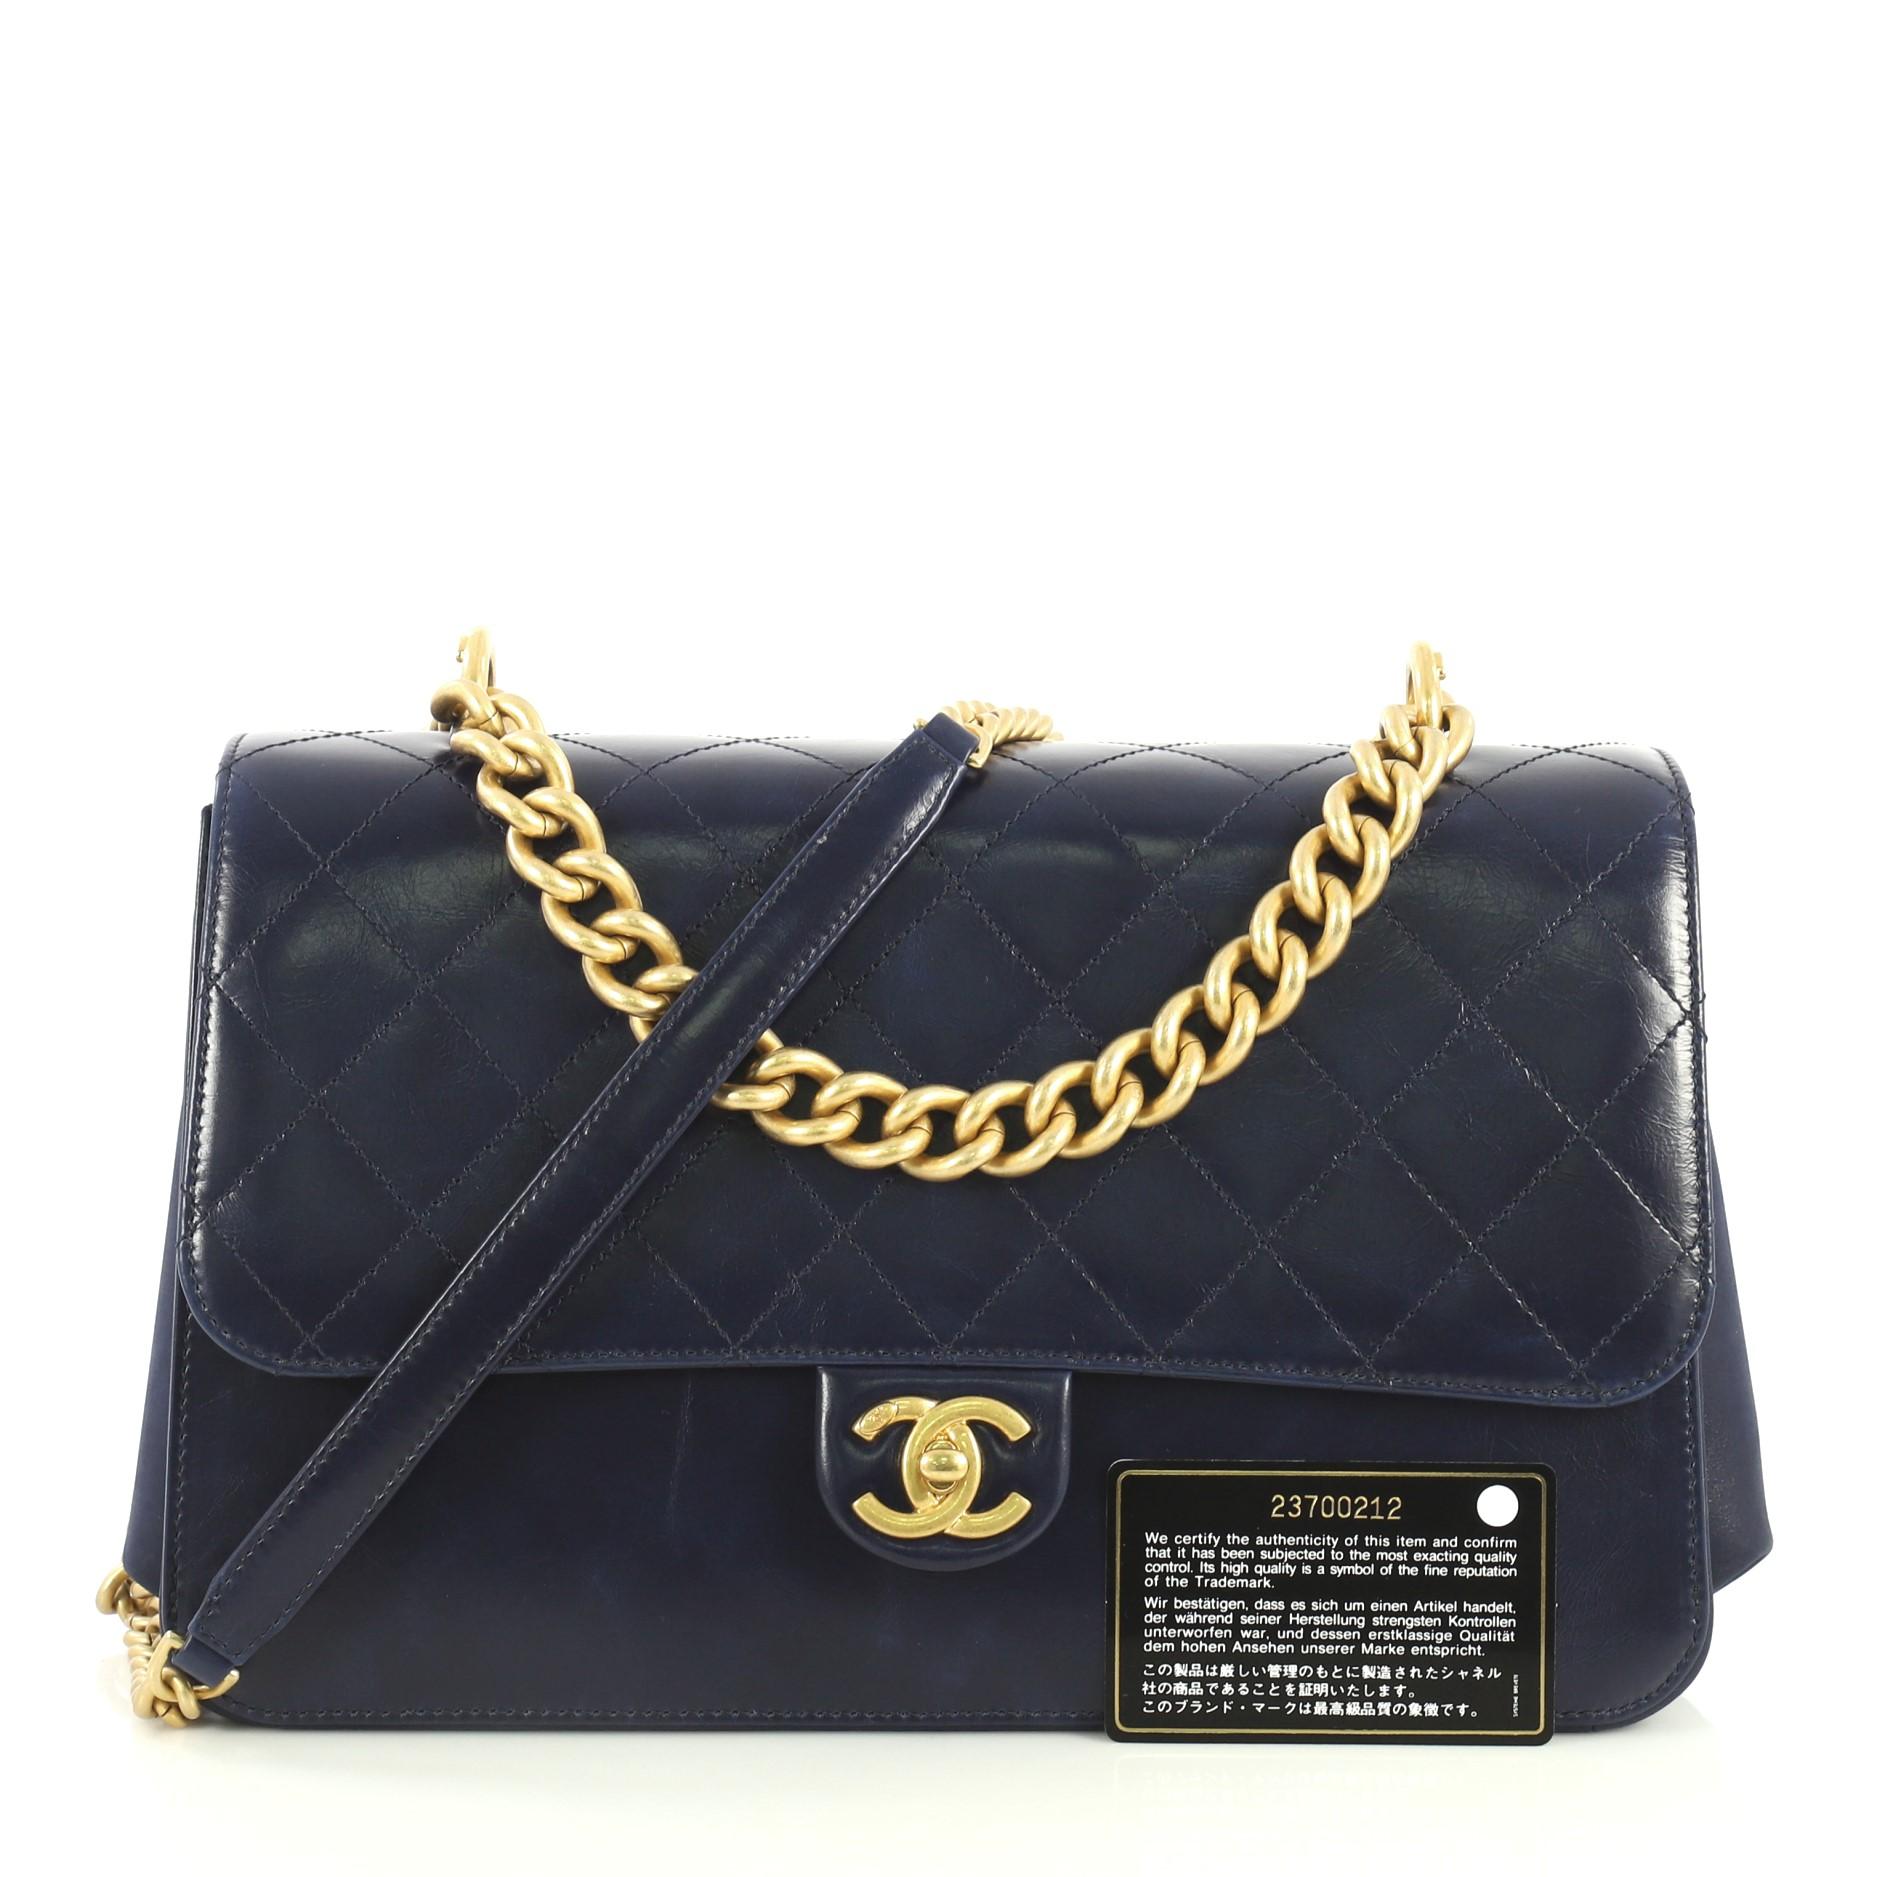 This Chanel Paris Cosmopolite Straight Lined Flap Bag Quilted Aged Calfskin Medium, crafted in blue quilted aged calfskin leather, features chain link handle, chain link strap with leather pad, exterior back slip pocket and aged gold-tone hardware.